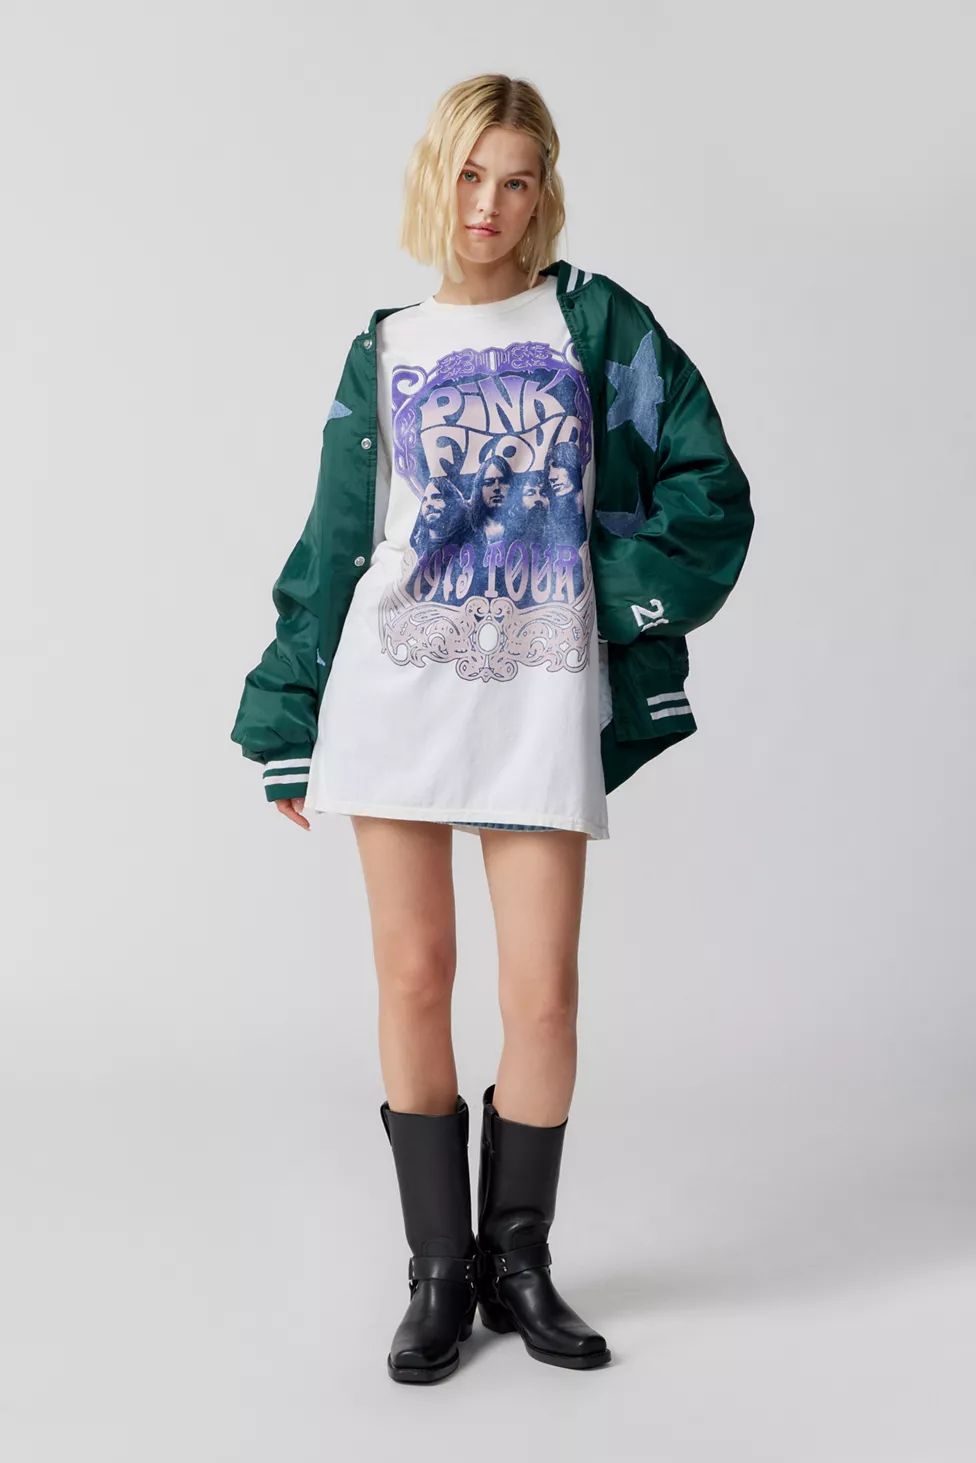 Pink Floyd Tour Poster T-Shirt Dress | Urban Outfitters (US and RoW)